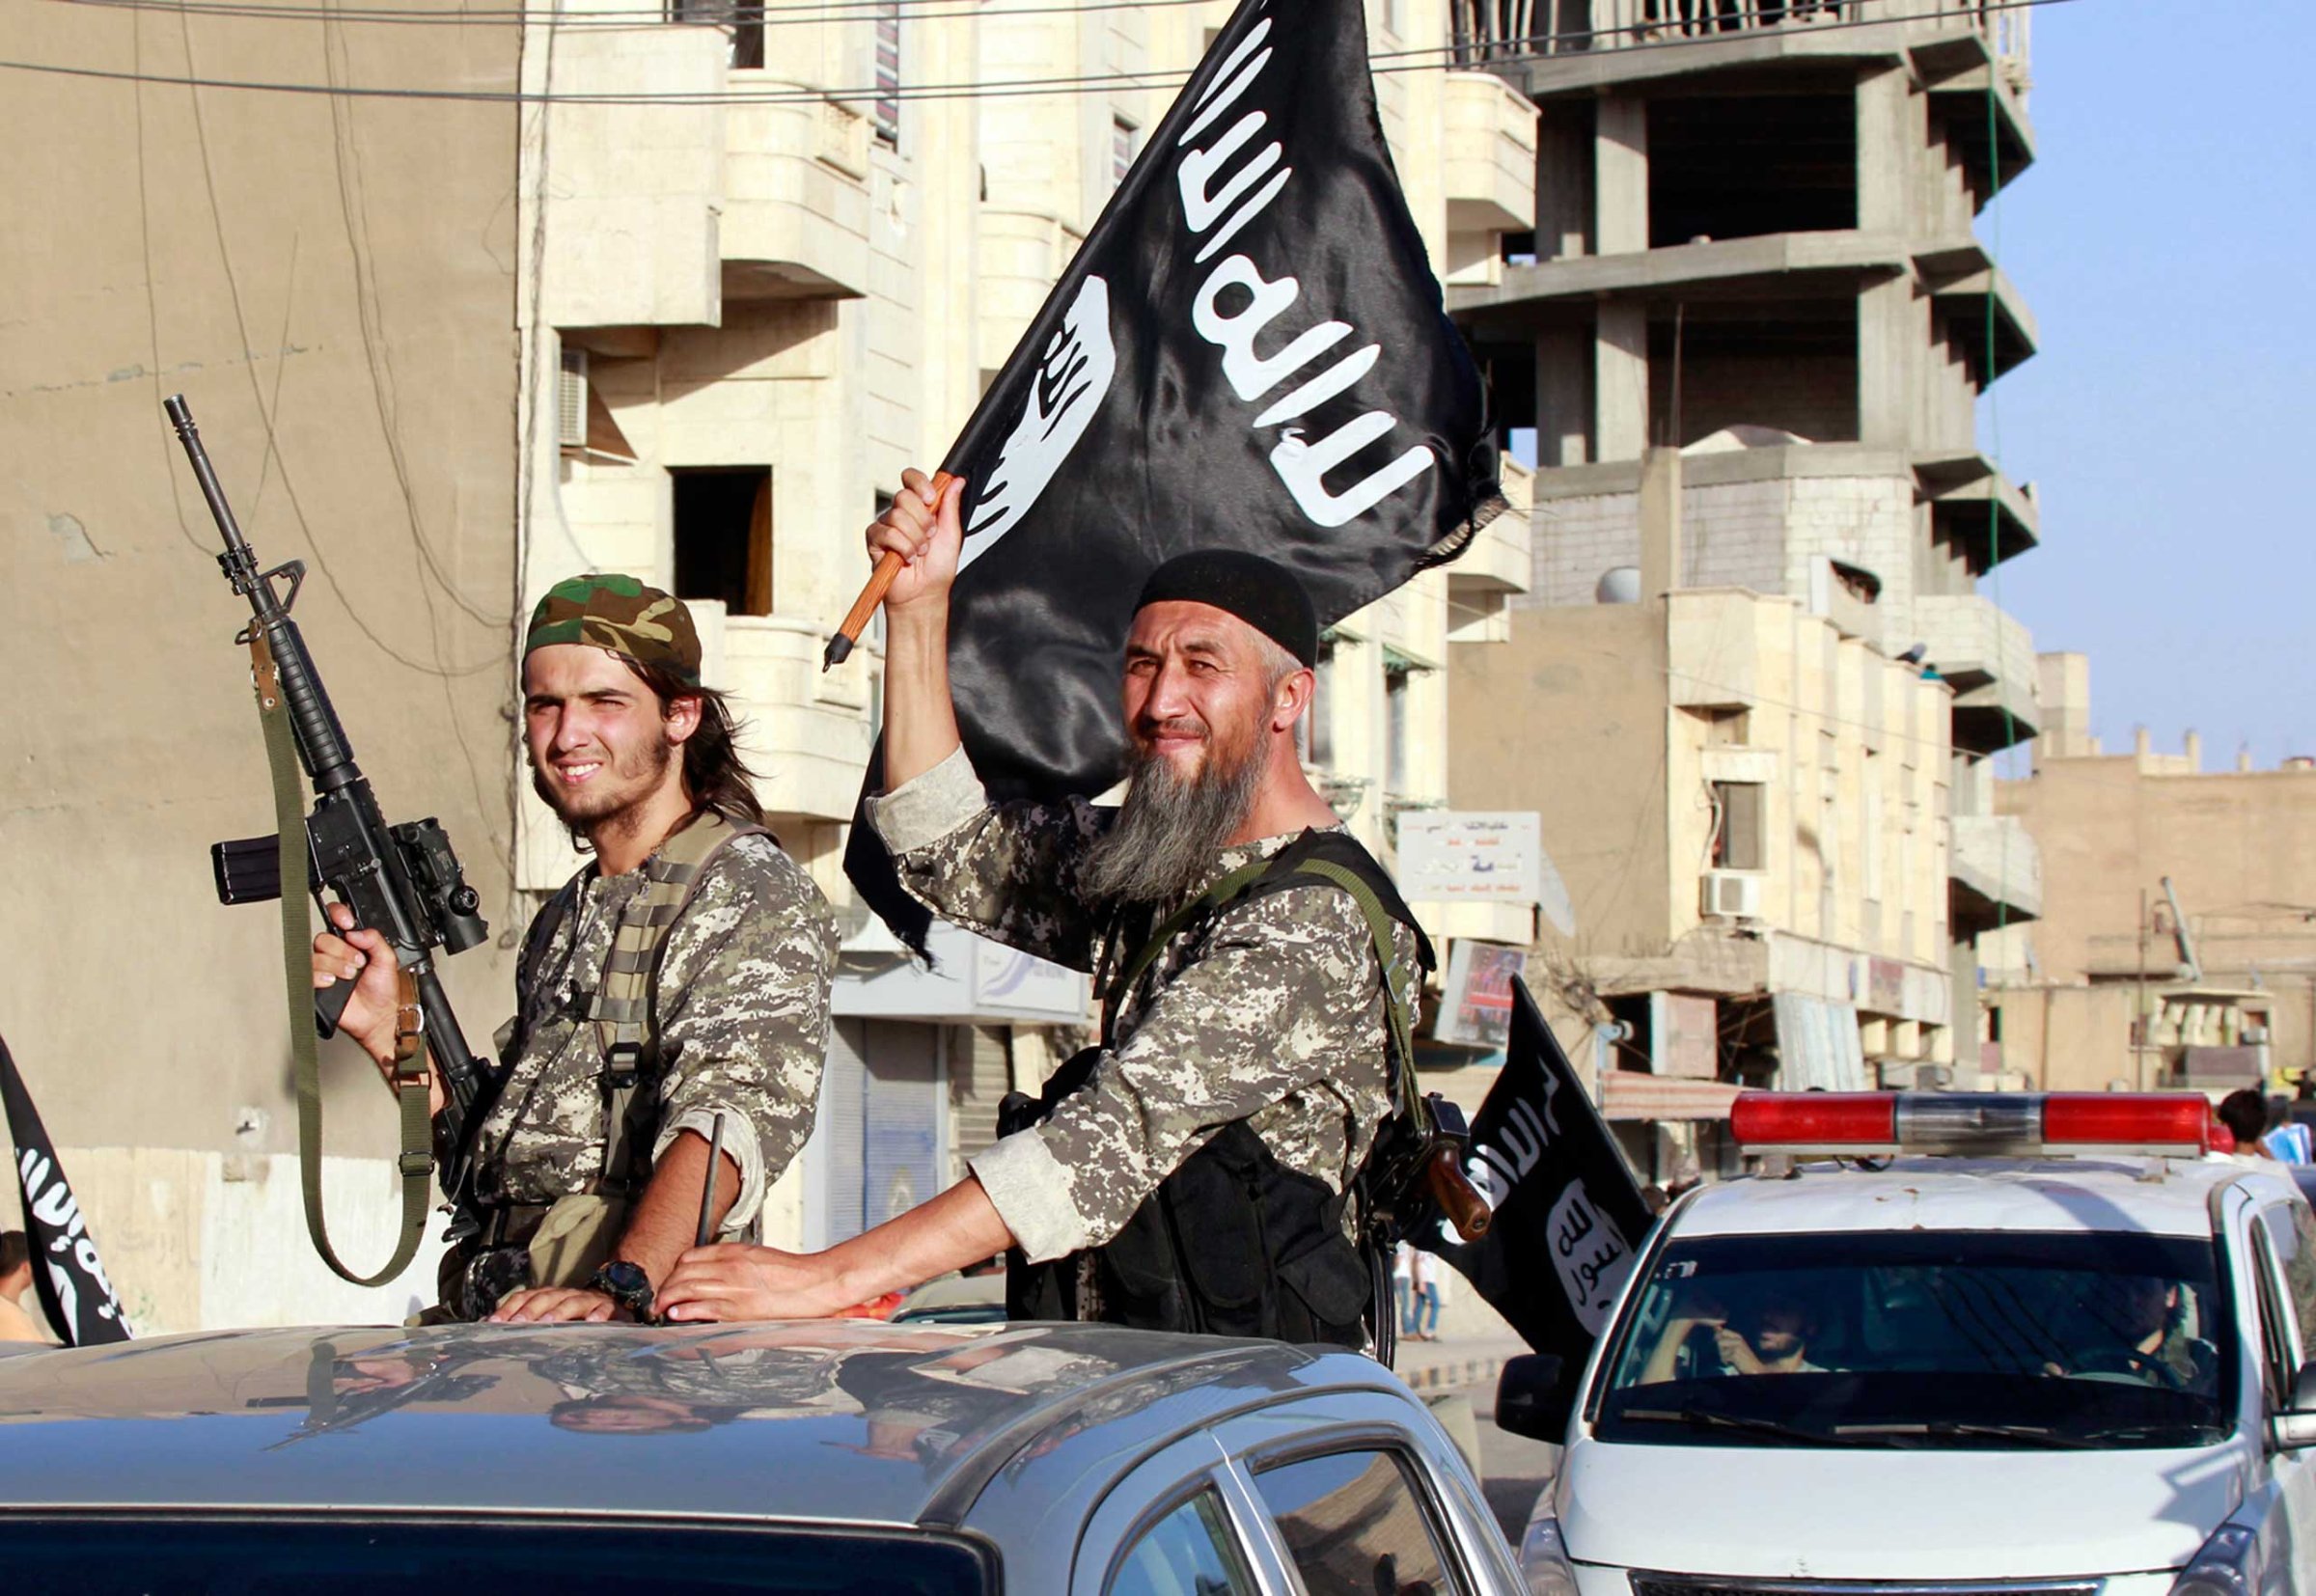 Militant Islamist fighters wave flags as they take part in a military parade along the streets of Syria's northern Raqqa province June 30, 2014.